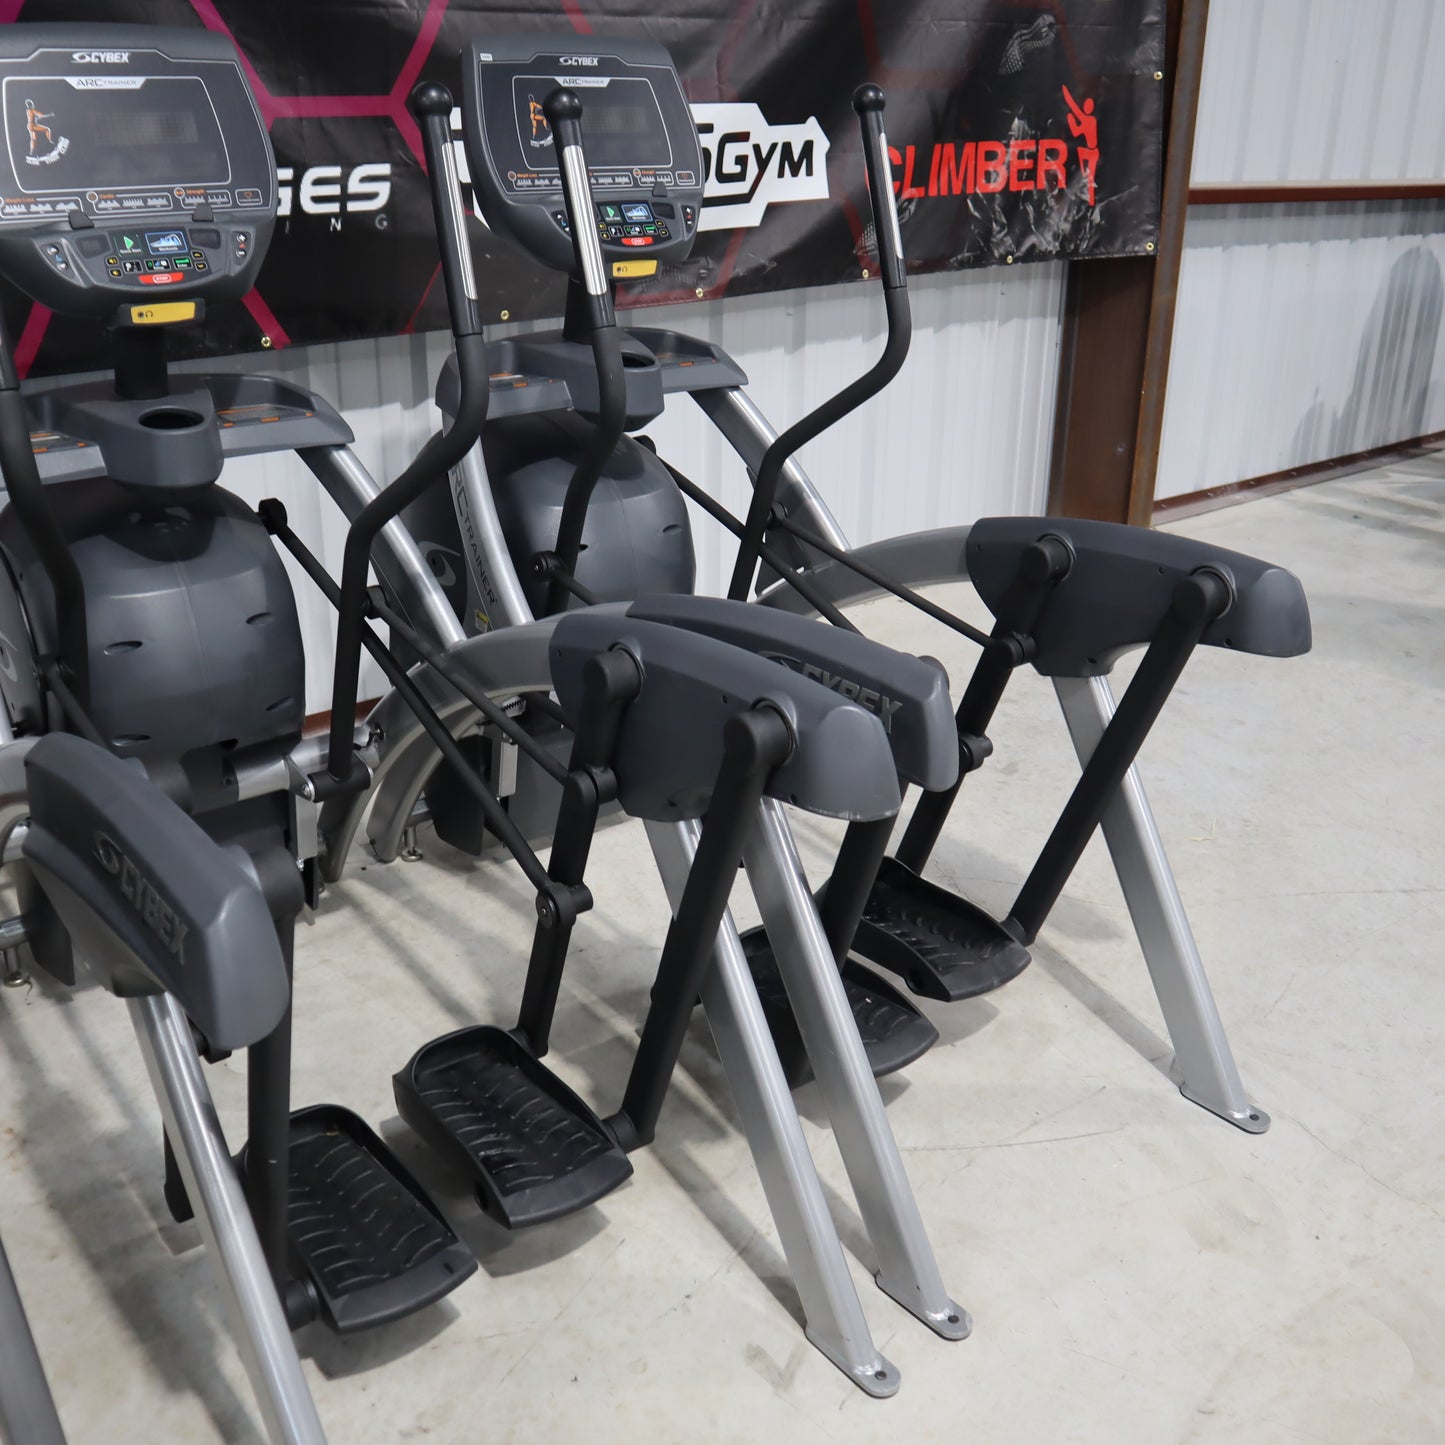 Cybex Arc Trainer Package *Two 630A Total Body, Two 626AT Total Body* (Used)